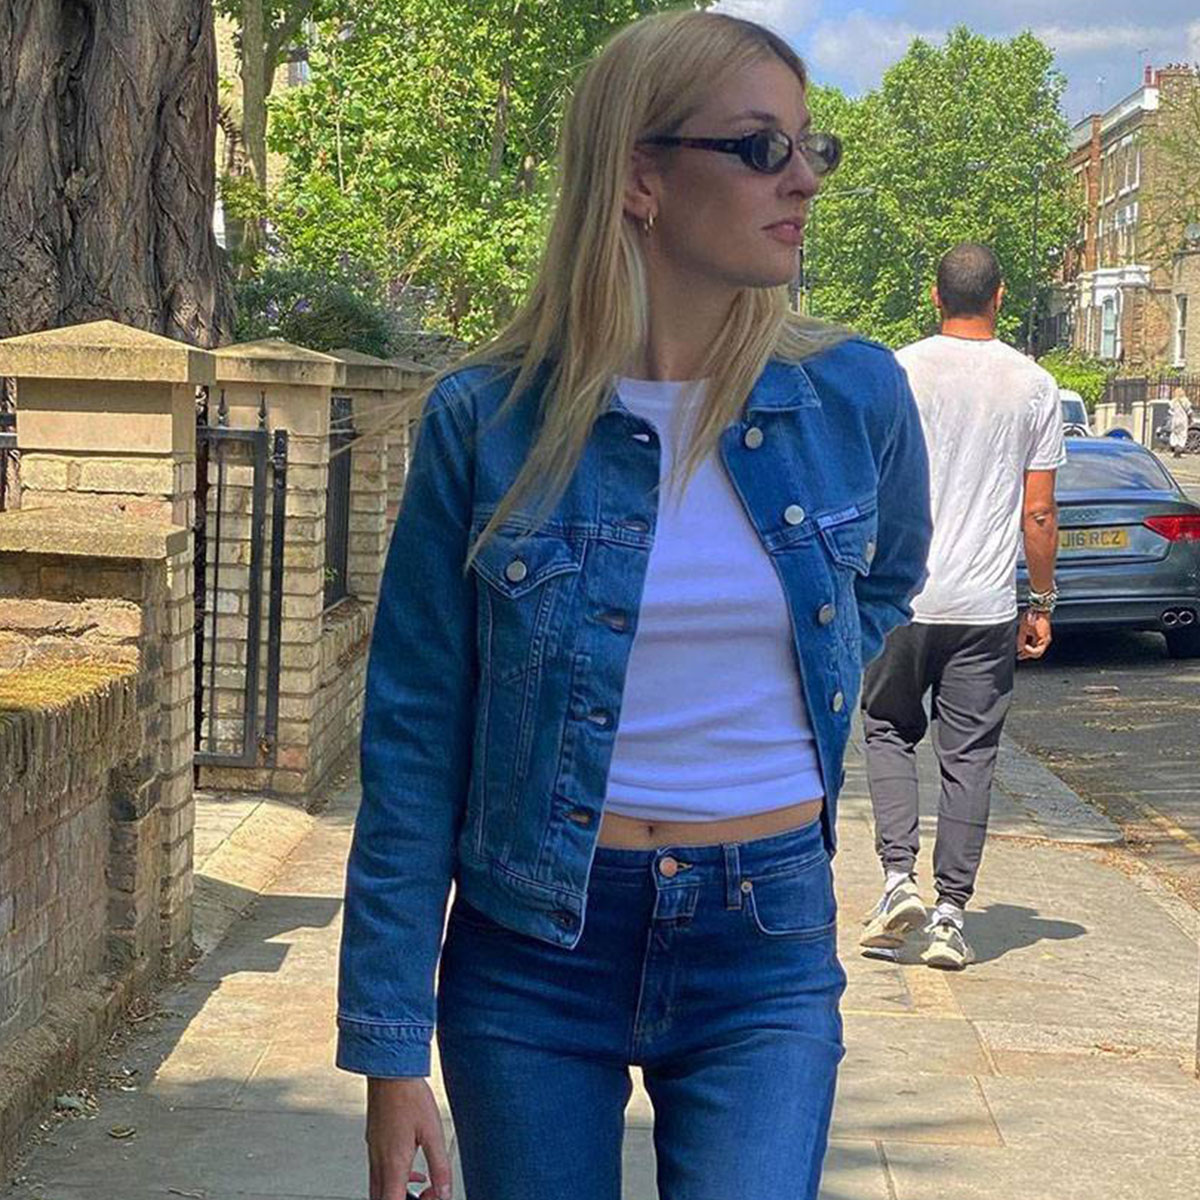 9 Street Style Snaps That Will Make You Want to Wear Flared Jeans